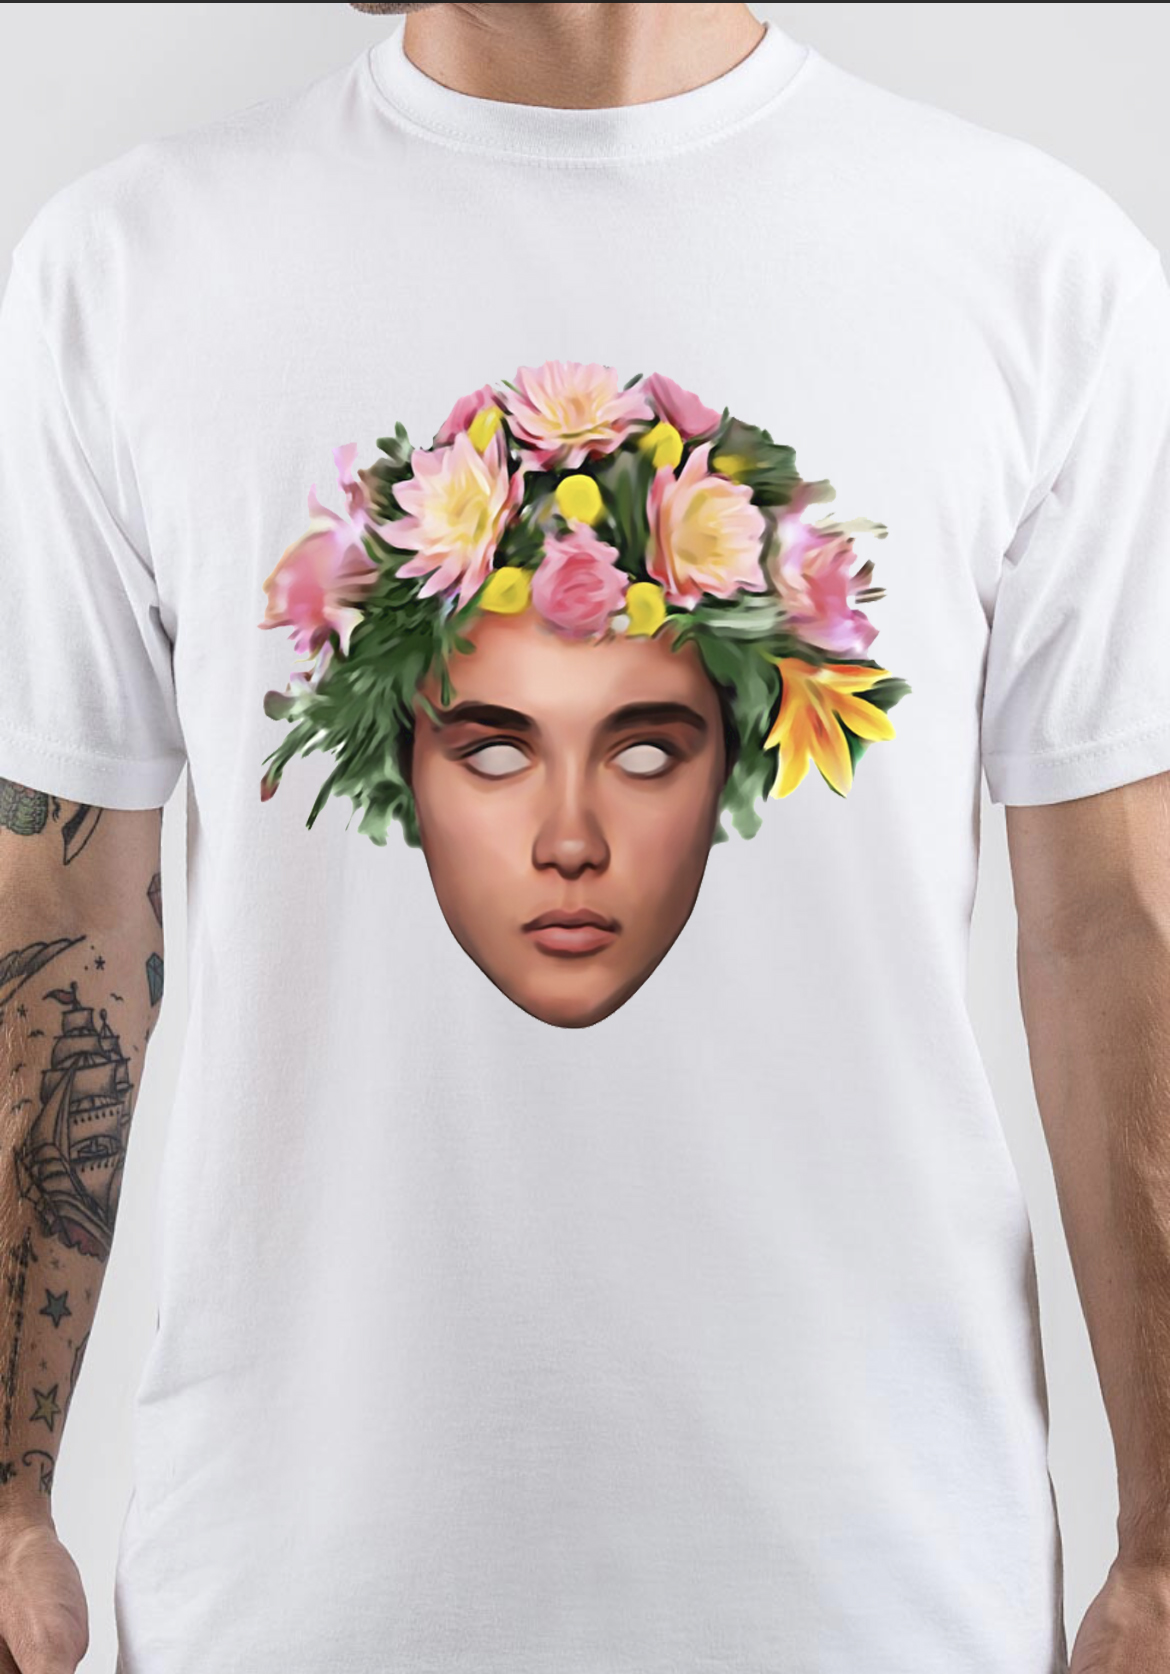 Midsommar T-Shirt And Merchandise